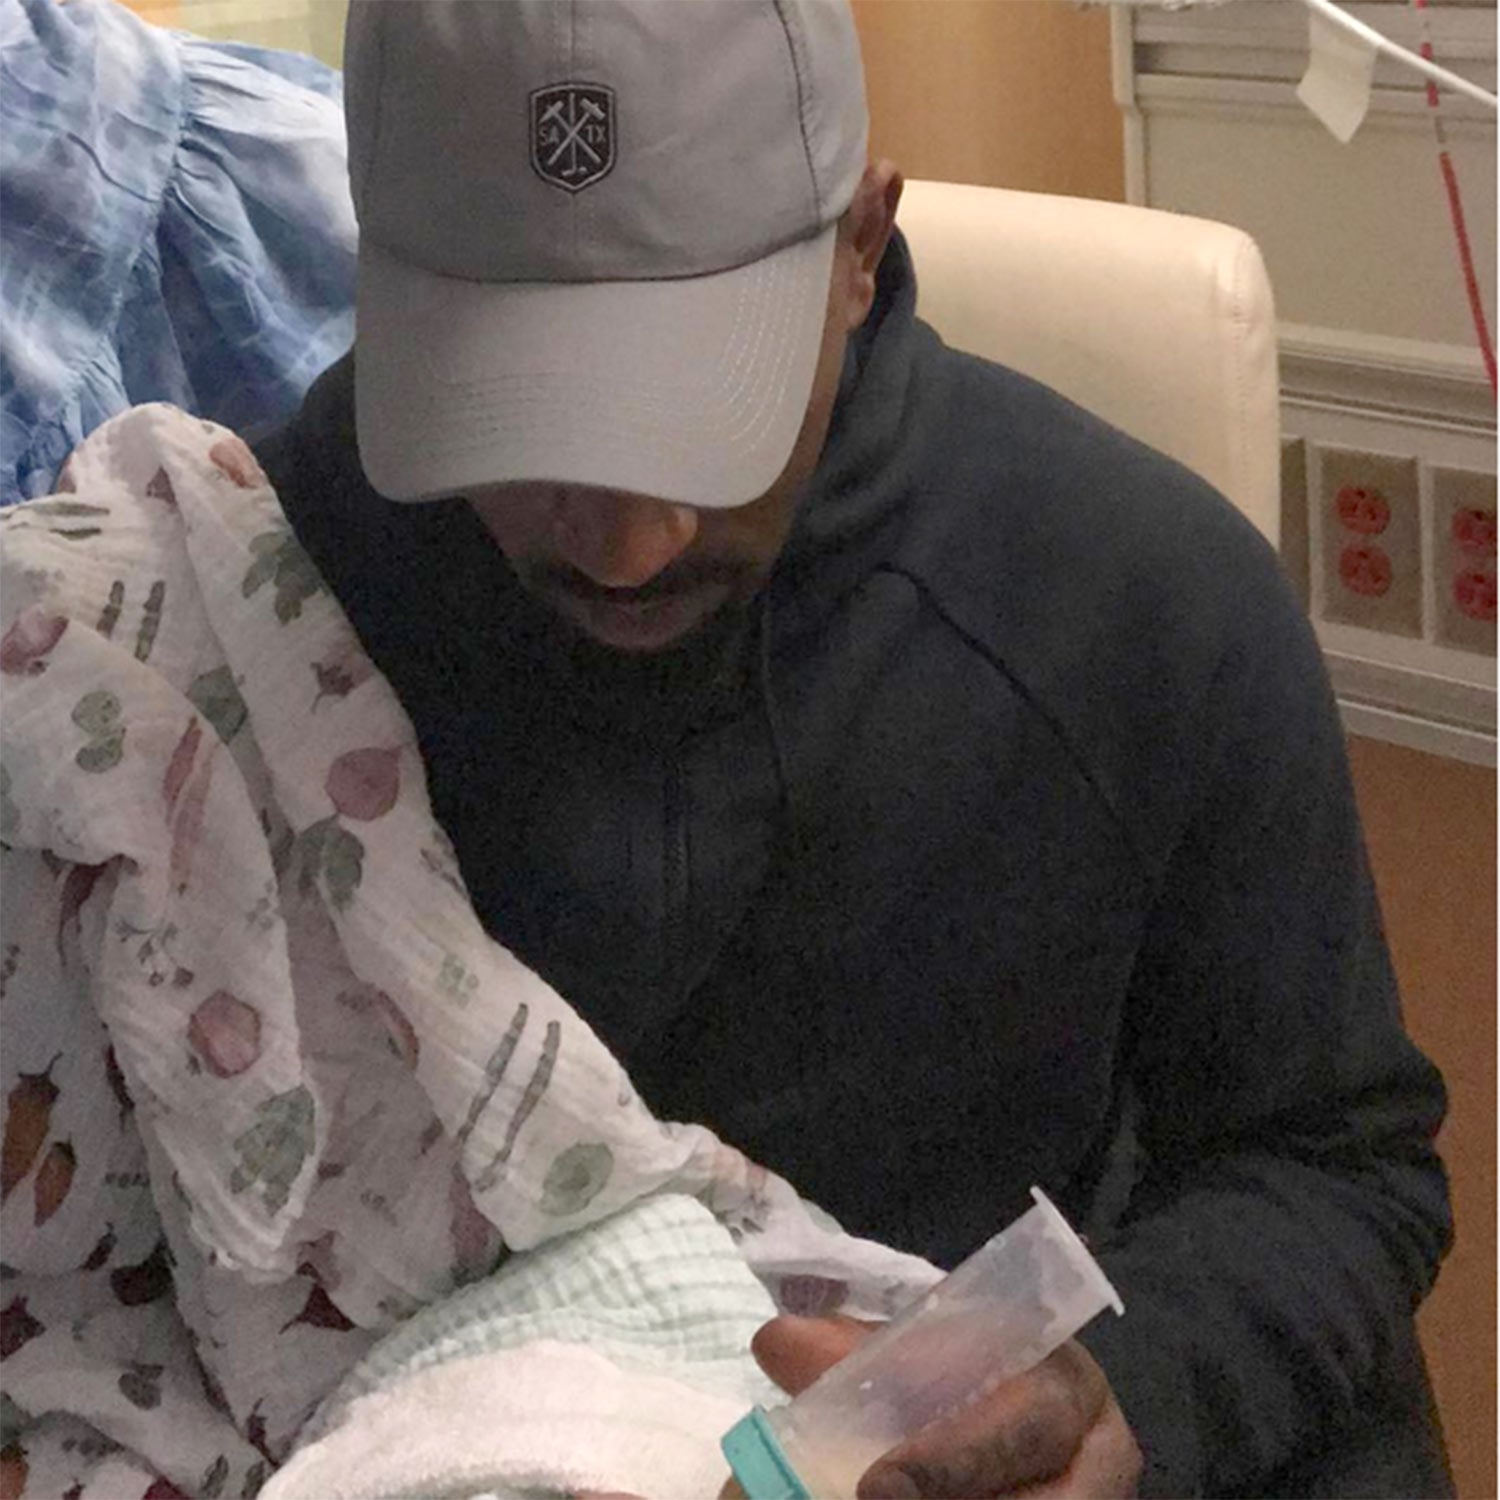 J.R. Smith And Wife Leave Hospital With Premature Baby